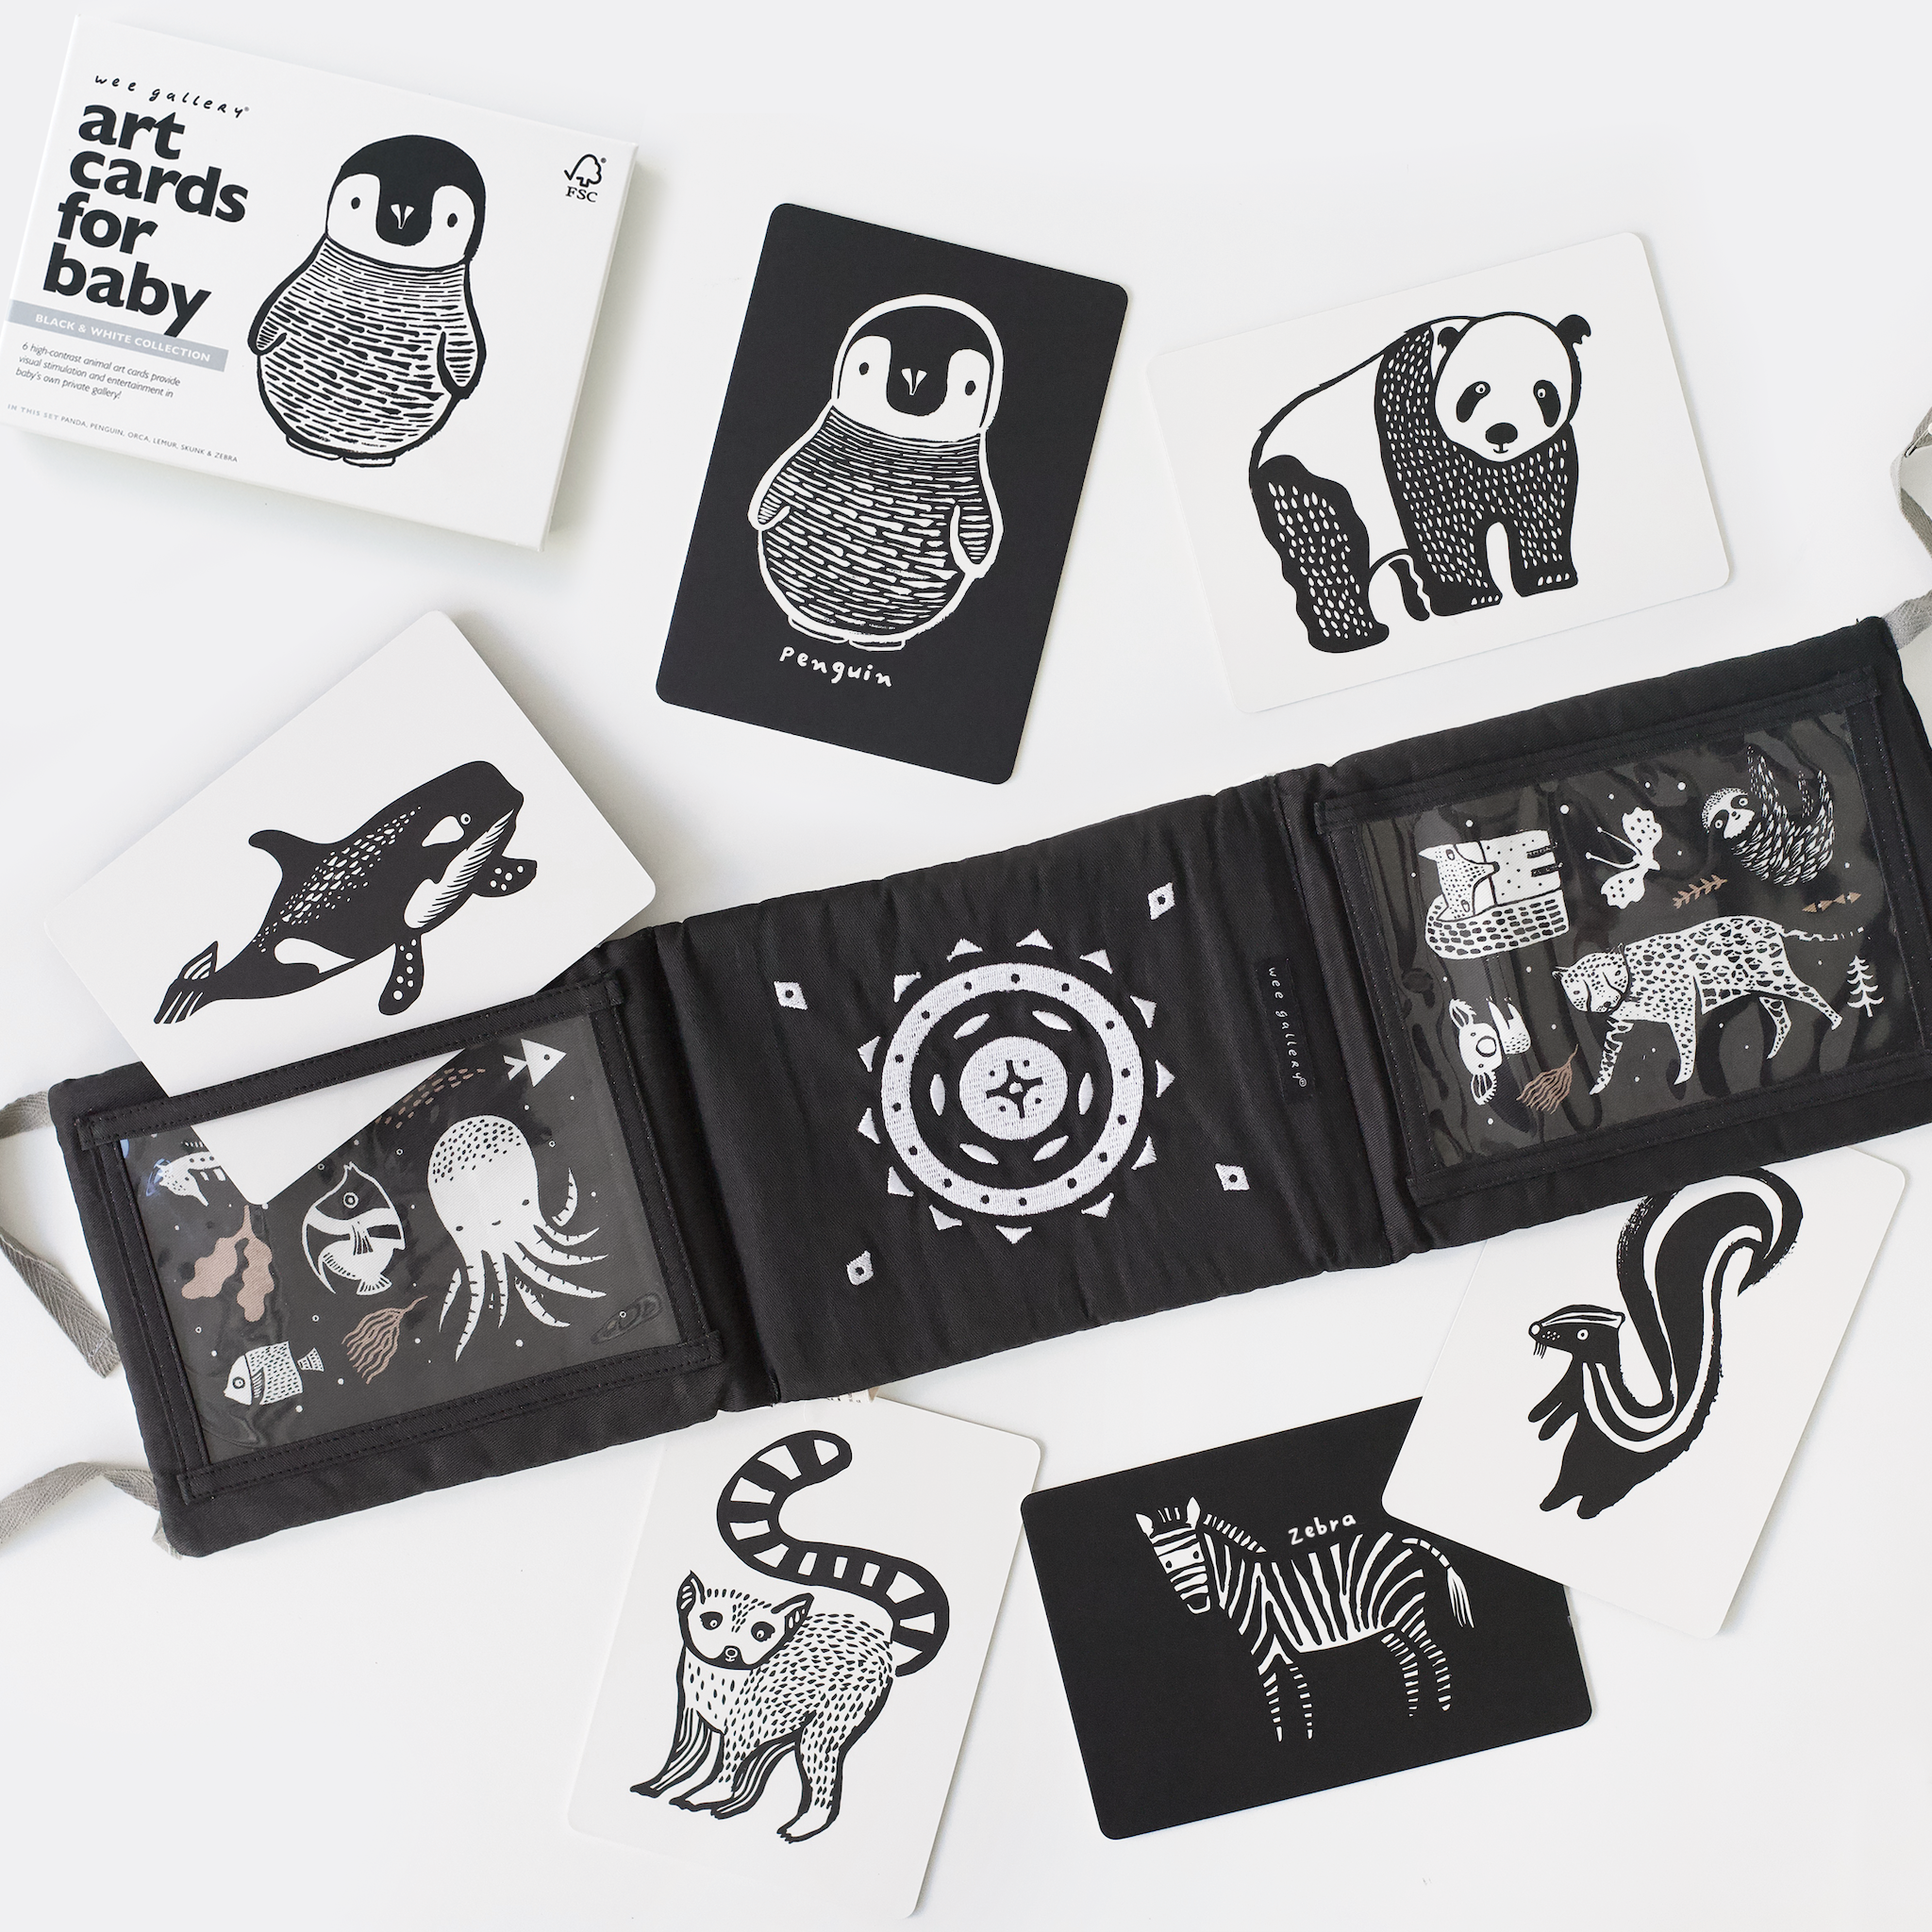 baby-tummy-time-art-gallery-high-contrast-black-and-white-cards.png